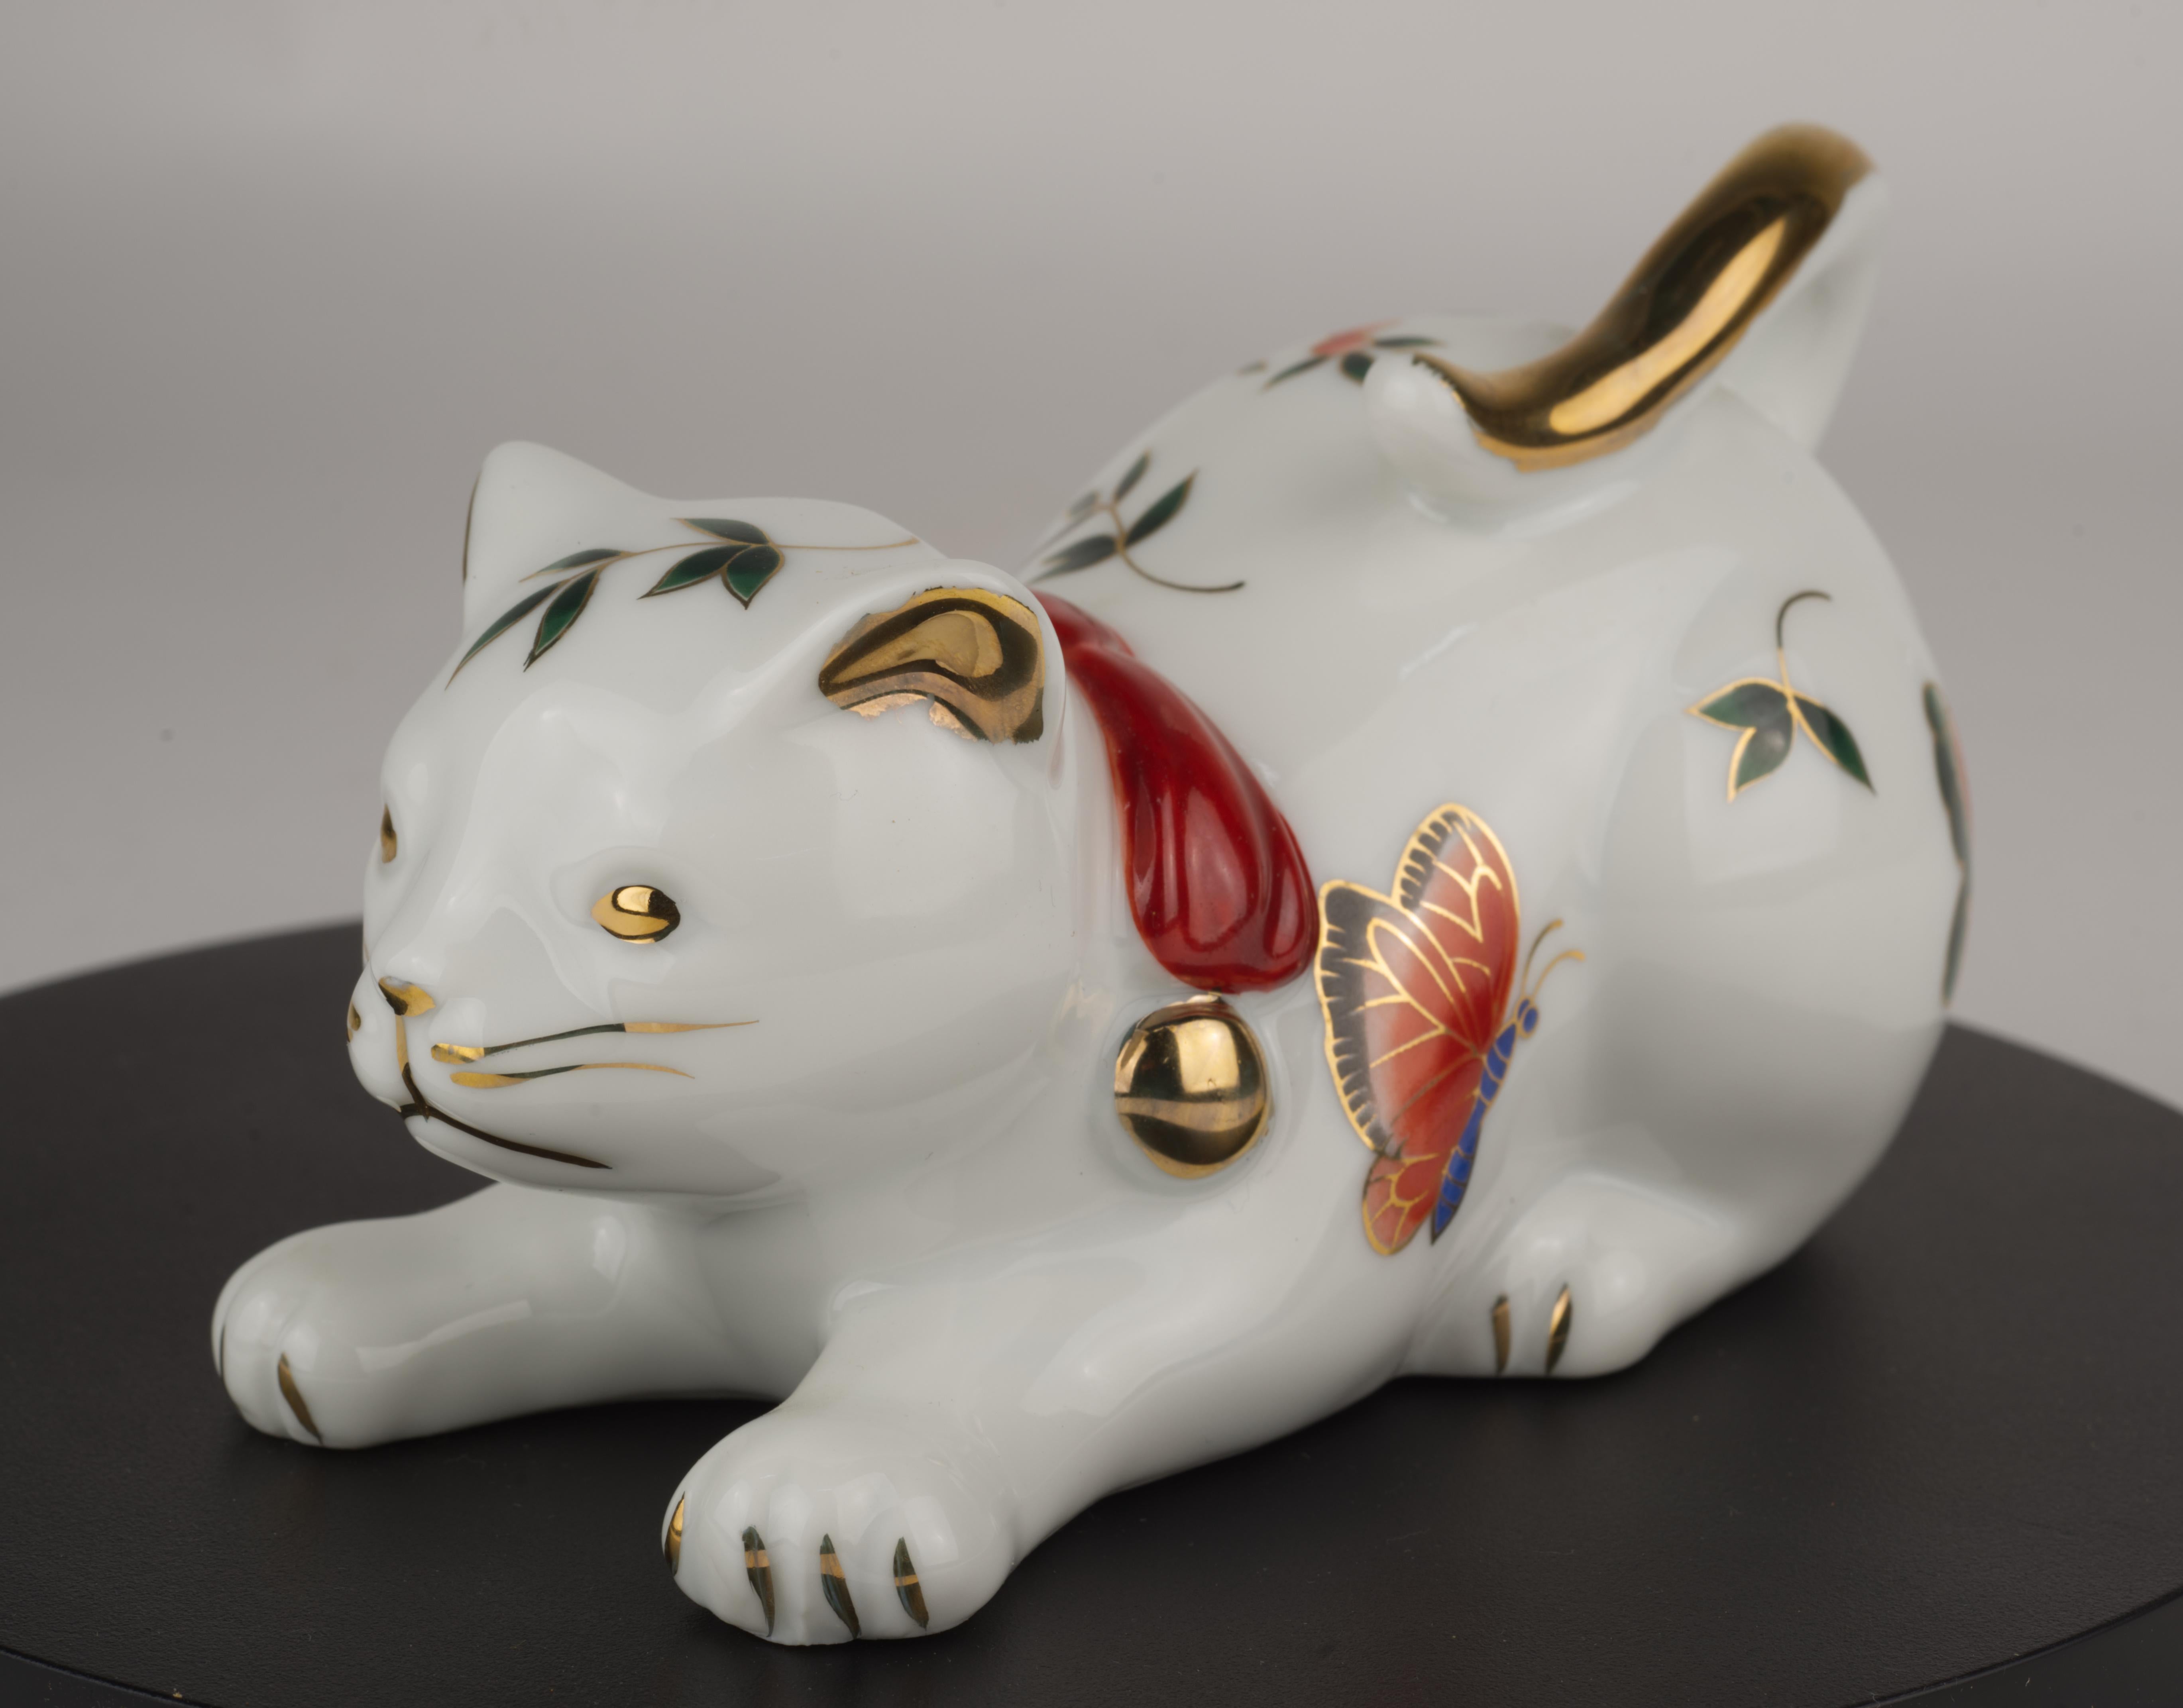 Japanese Takahashi Porcelain Playing Cat Figurine Hand-decorated with Butterflies For Sale